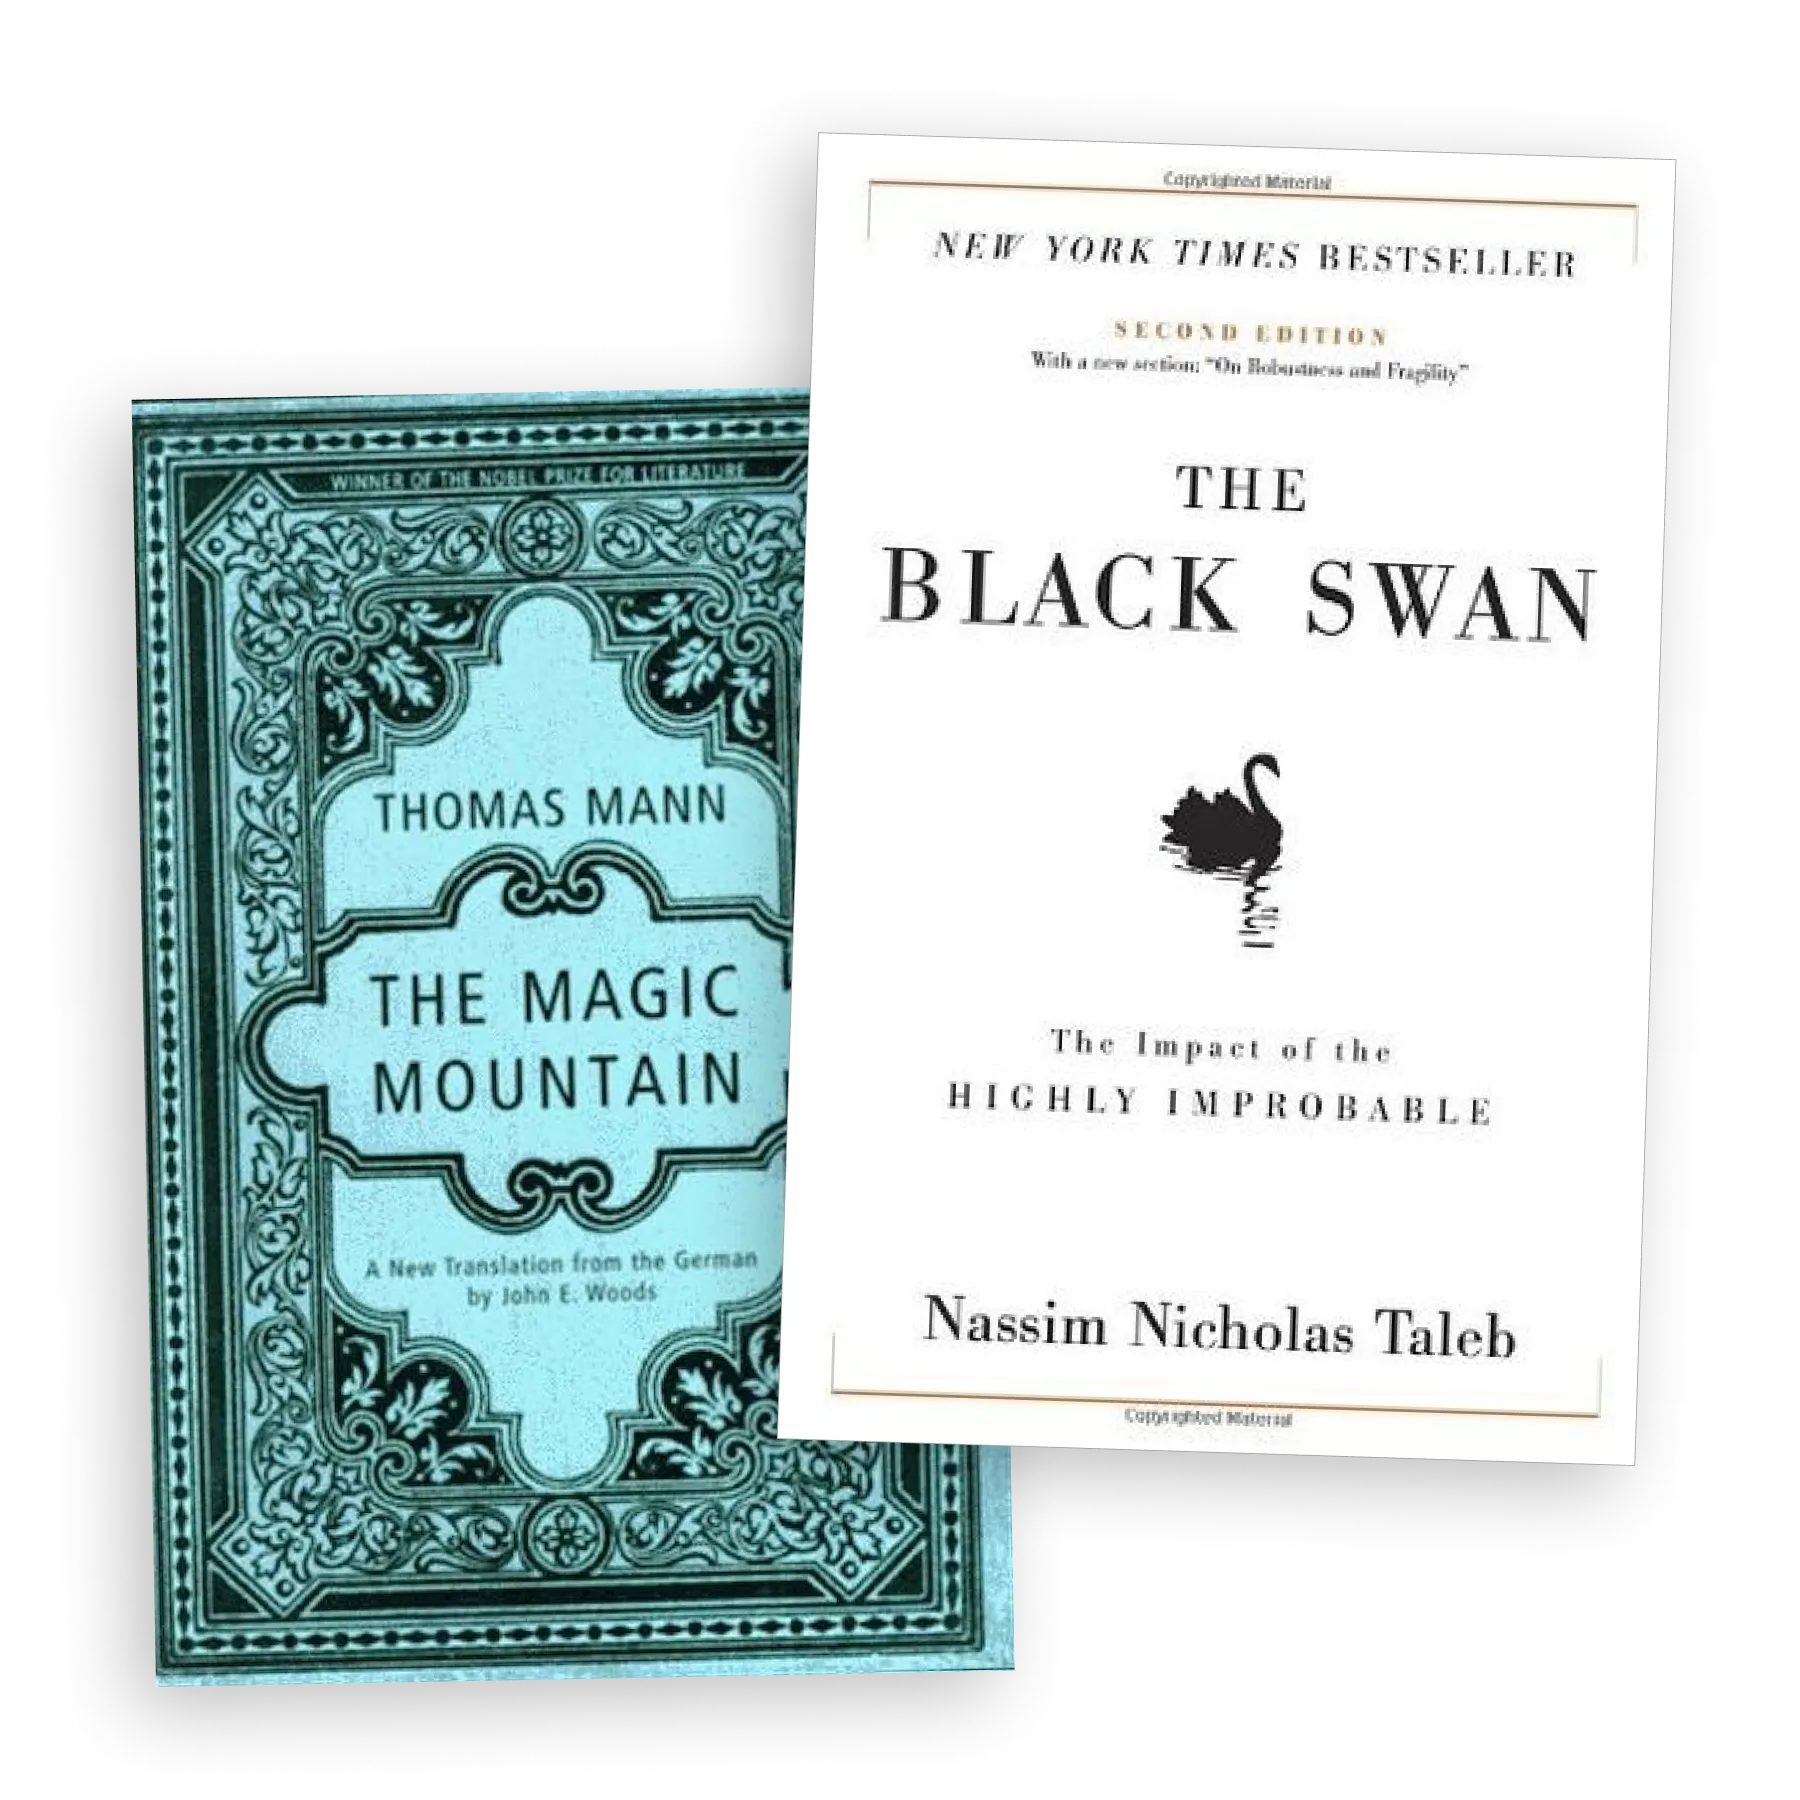 An image showing the covers of the books "The Black Swan" by Nassim Taleb and "The Magic Mountain" by Thomas Mann